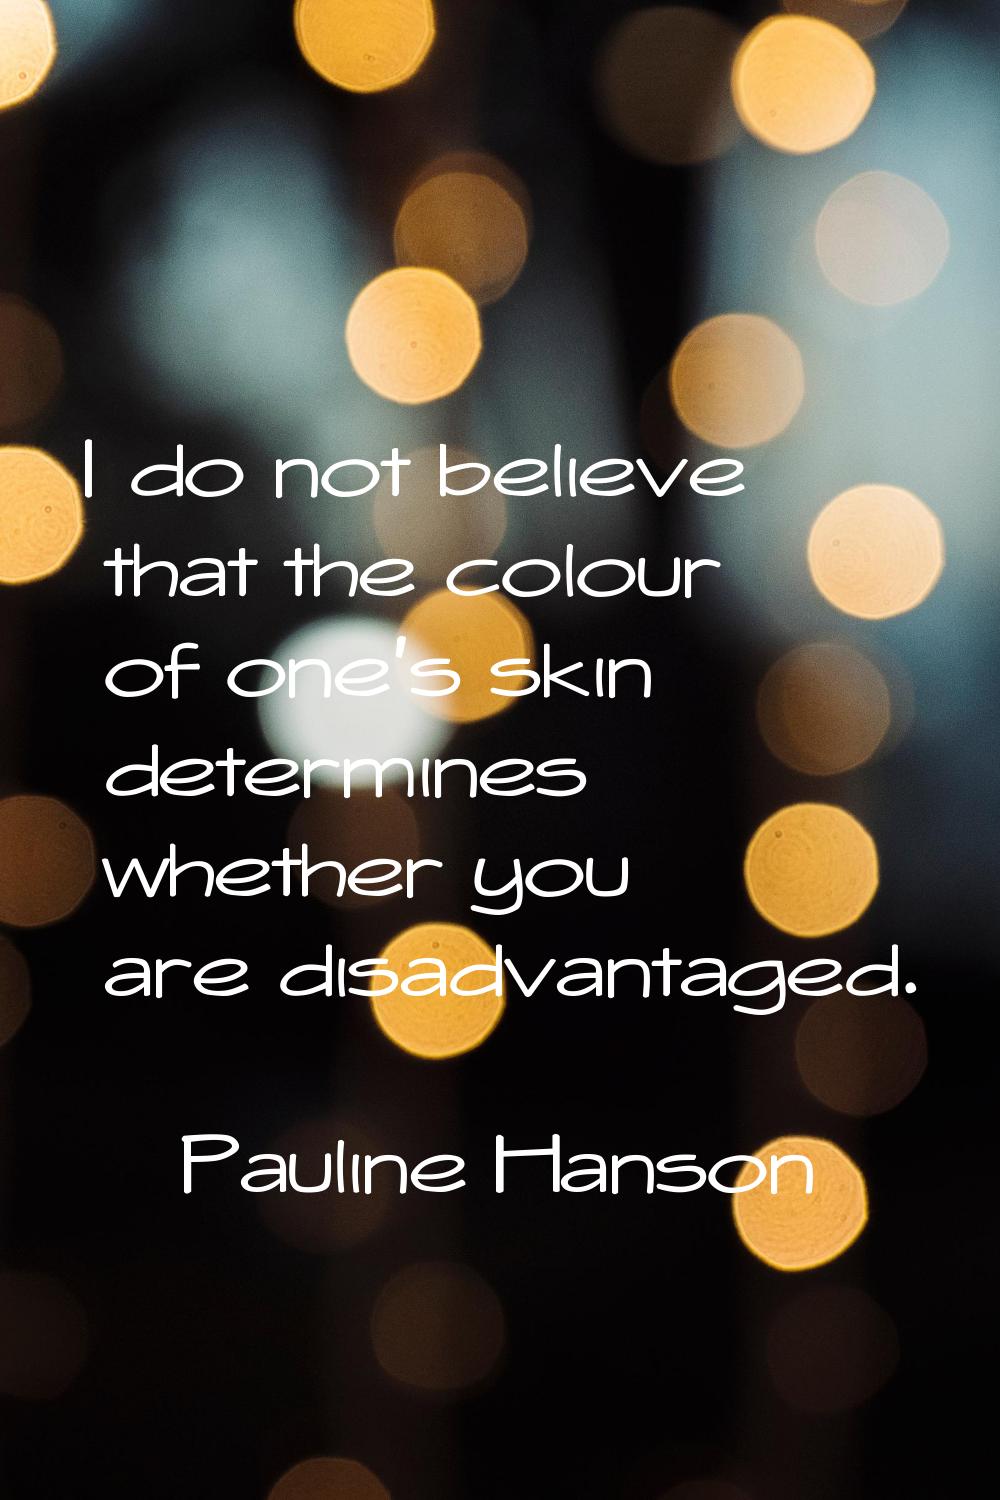 I do not believe that the colour of one's skin determines whether you are disadvantaged.